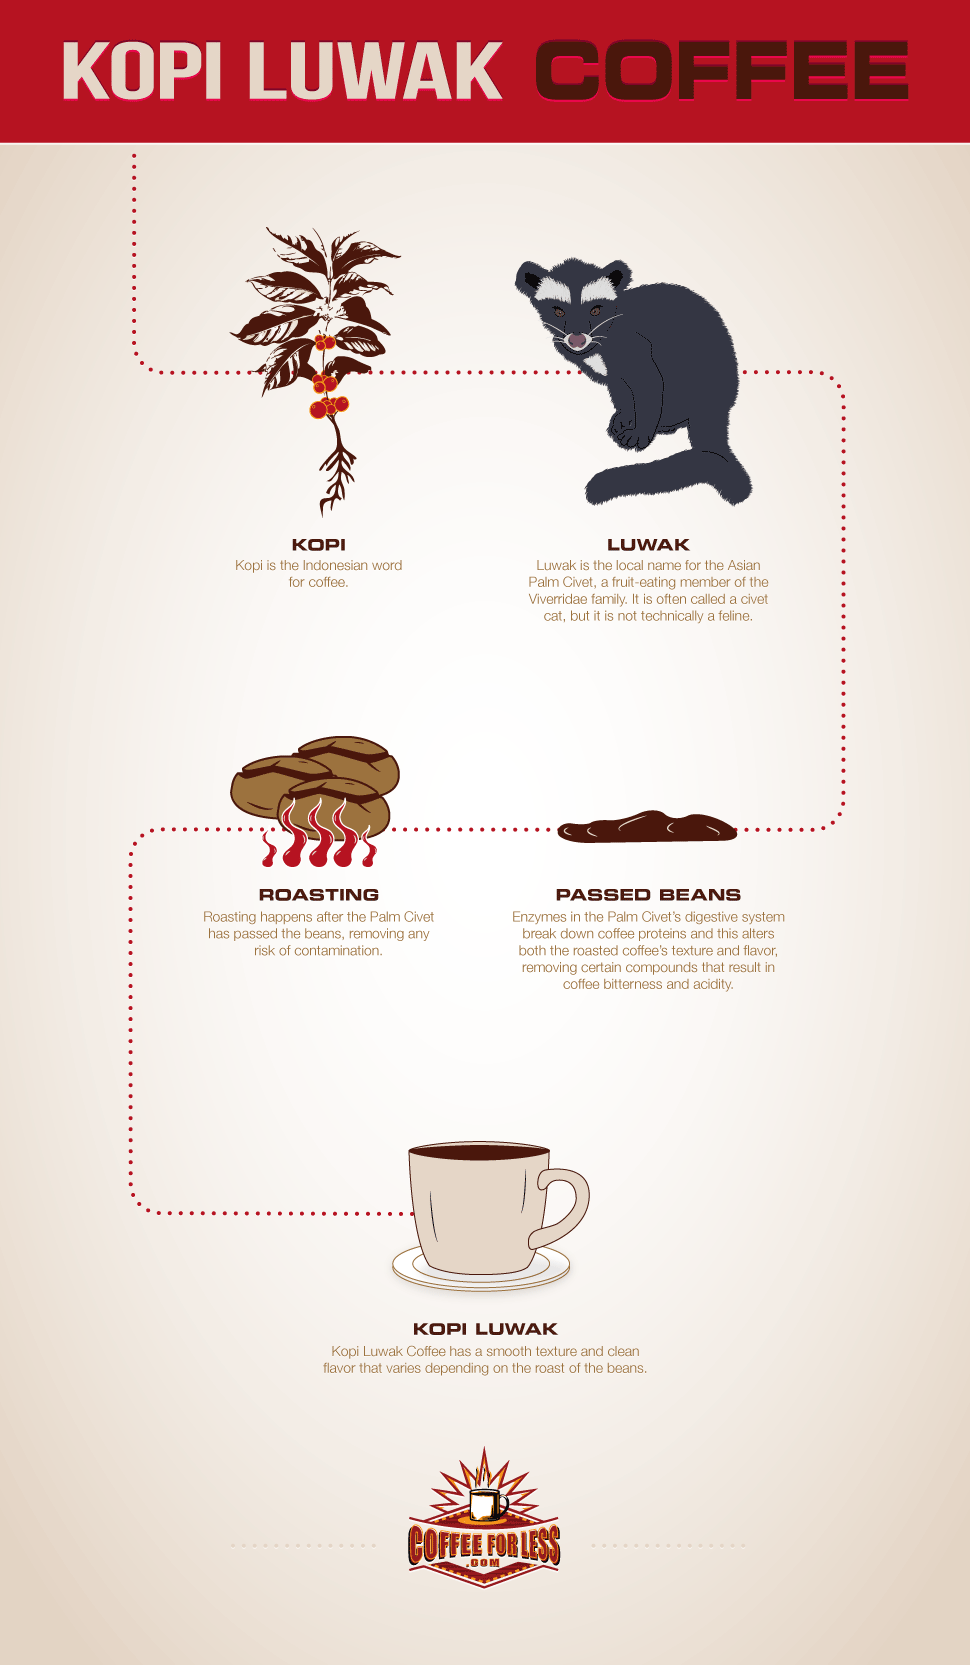 Kopi Luwak is a one-of-a-kind coffee that's highly sought after. Learn the secrets of this renowned beverage through CoffeeForLess infographics.